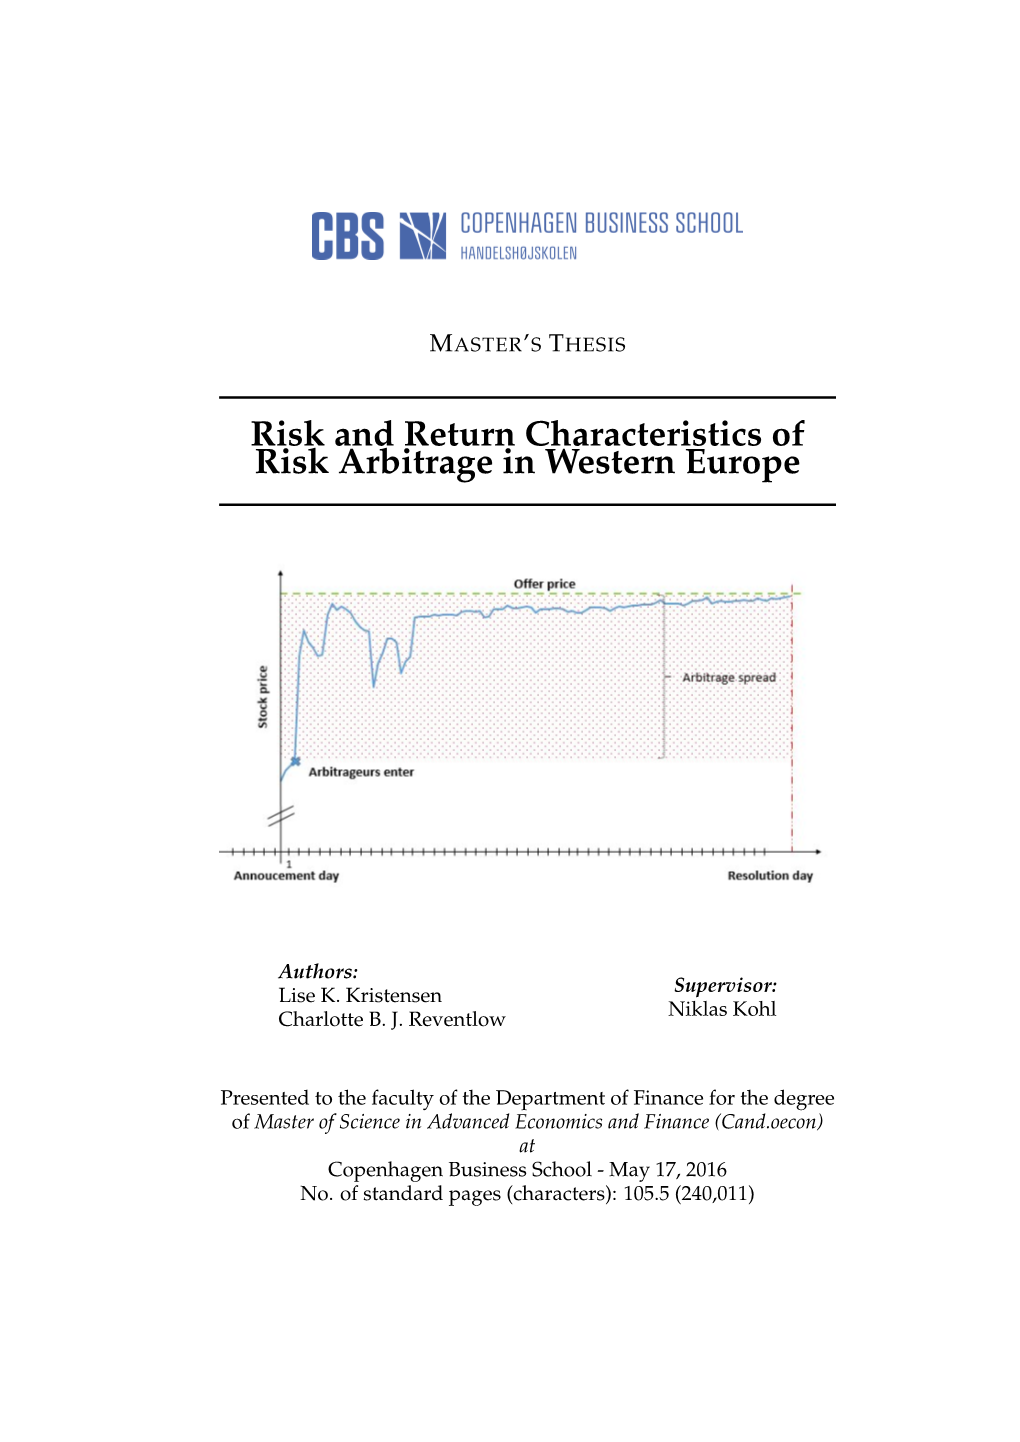 Risk and Return Characteristics of Risk Arbitrage in Western Europe